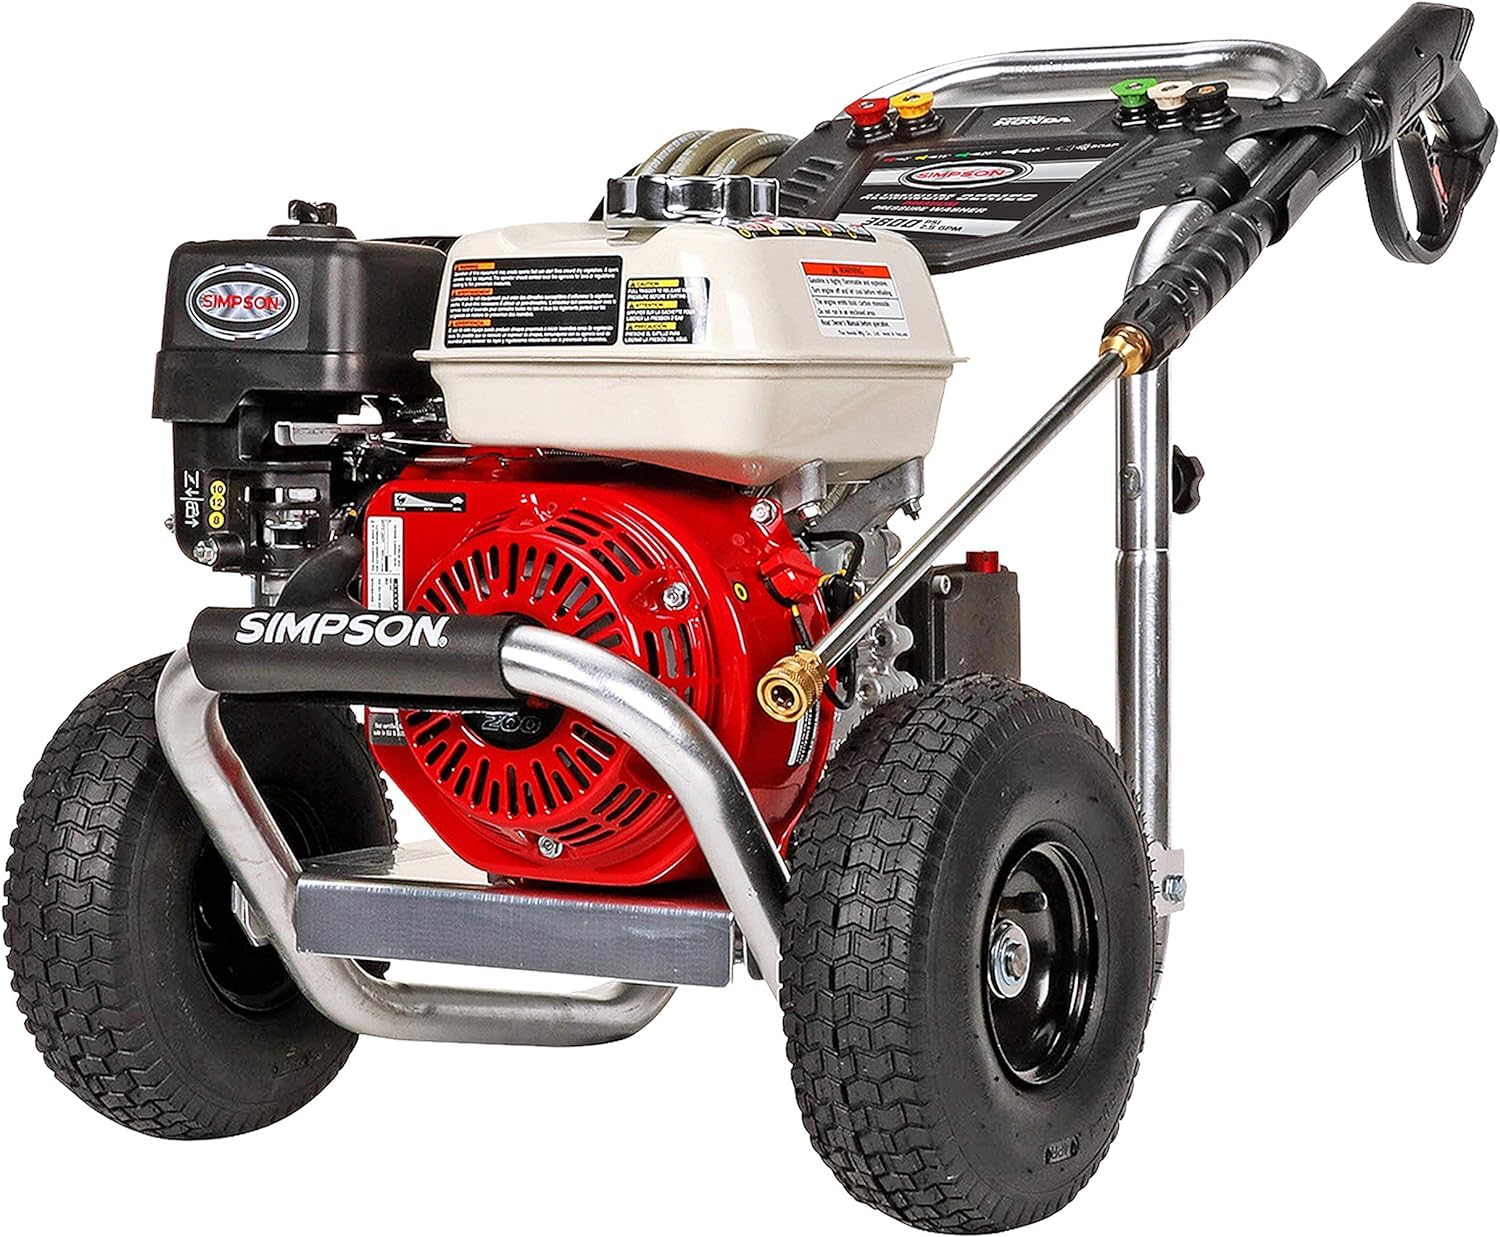 SIMPSON Cleaning ALH3425 Aluminum Series 3600 PSI Gas Pressure Washer, 2.5 GPM, Honda GX200 Engine, Includes Spray Gun and Extension Wand, 5 QC Nozzle Tips, 5/16-inch x 35-foot MorFlex Hose, 49-State 3600 PSI Honda GX200 (Refurbished)